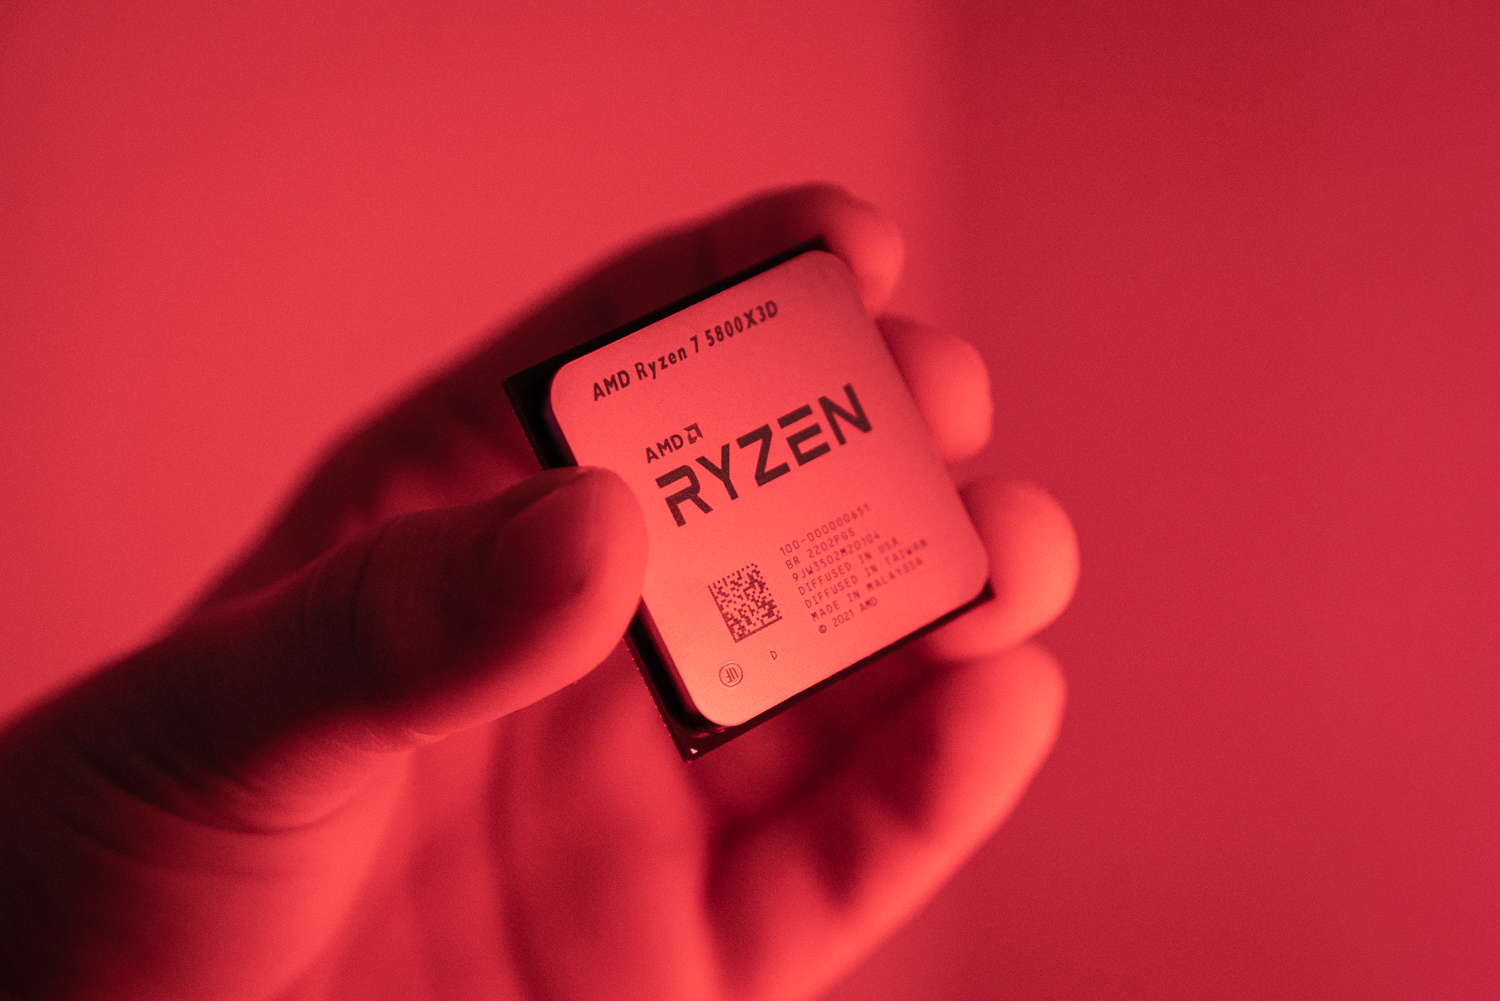 AMD Ryzen 7 5800X3D CPU Review: The King Of PC Gaming - Page 4